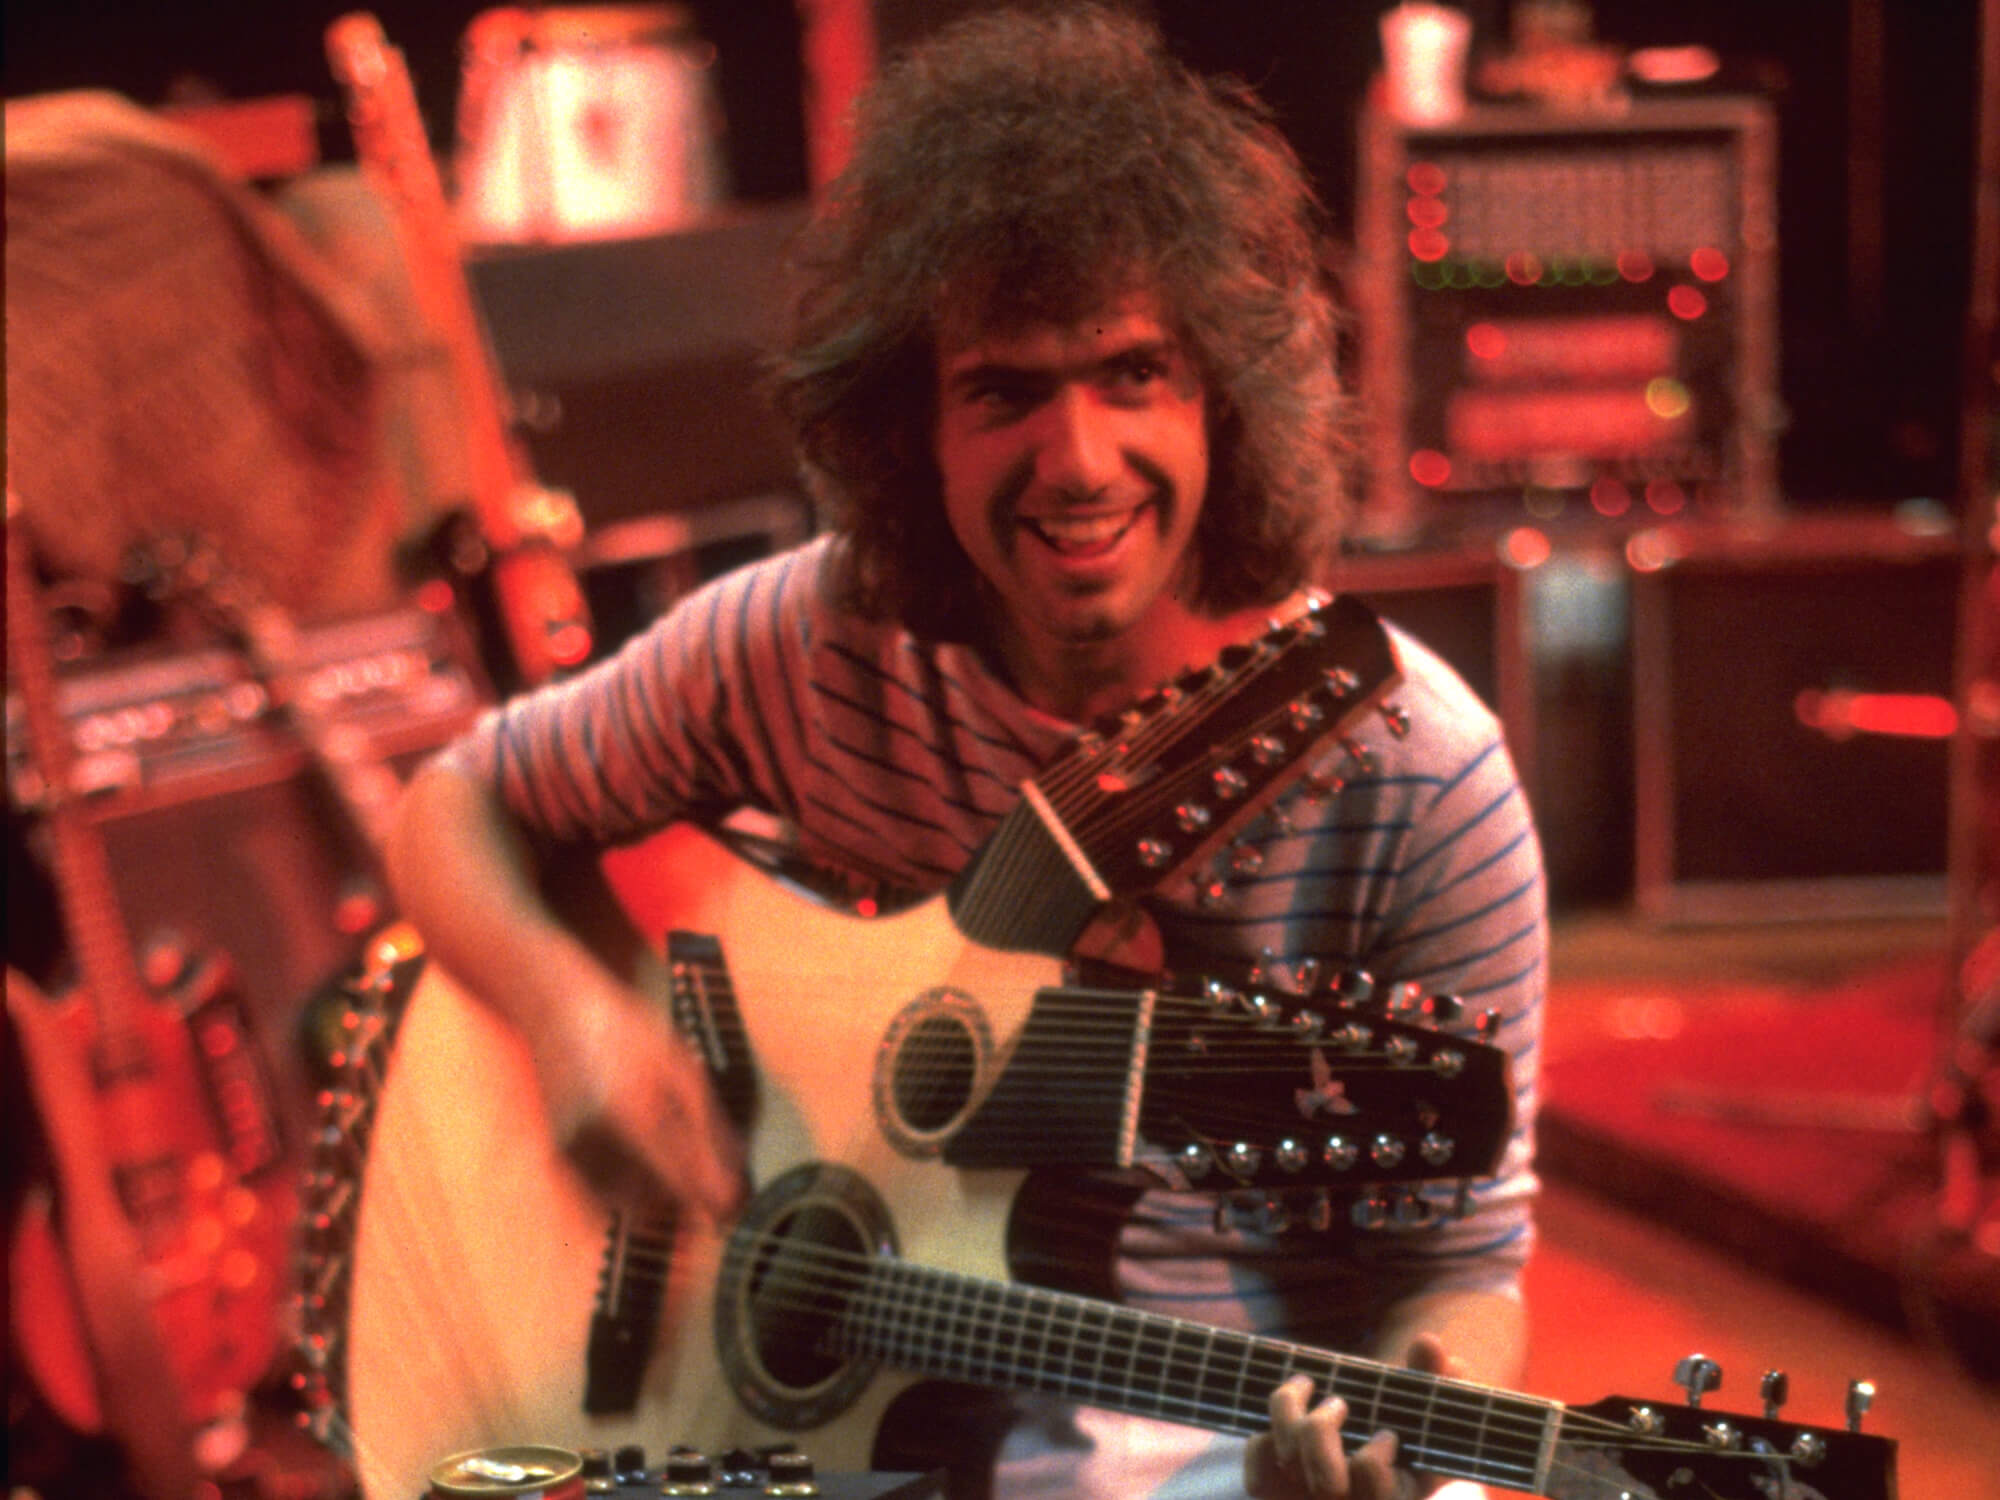 Pat Metheny with the Pikasso Guitar